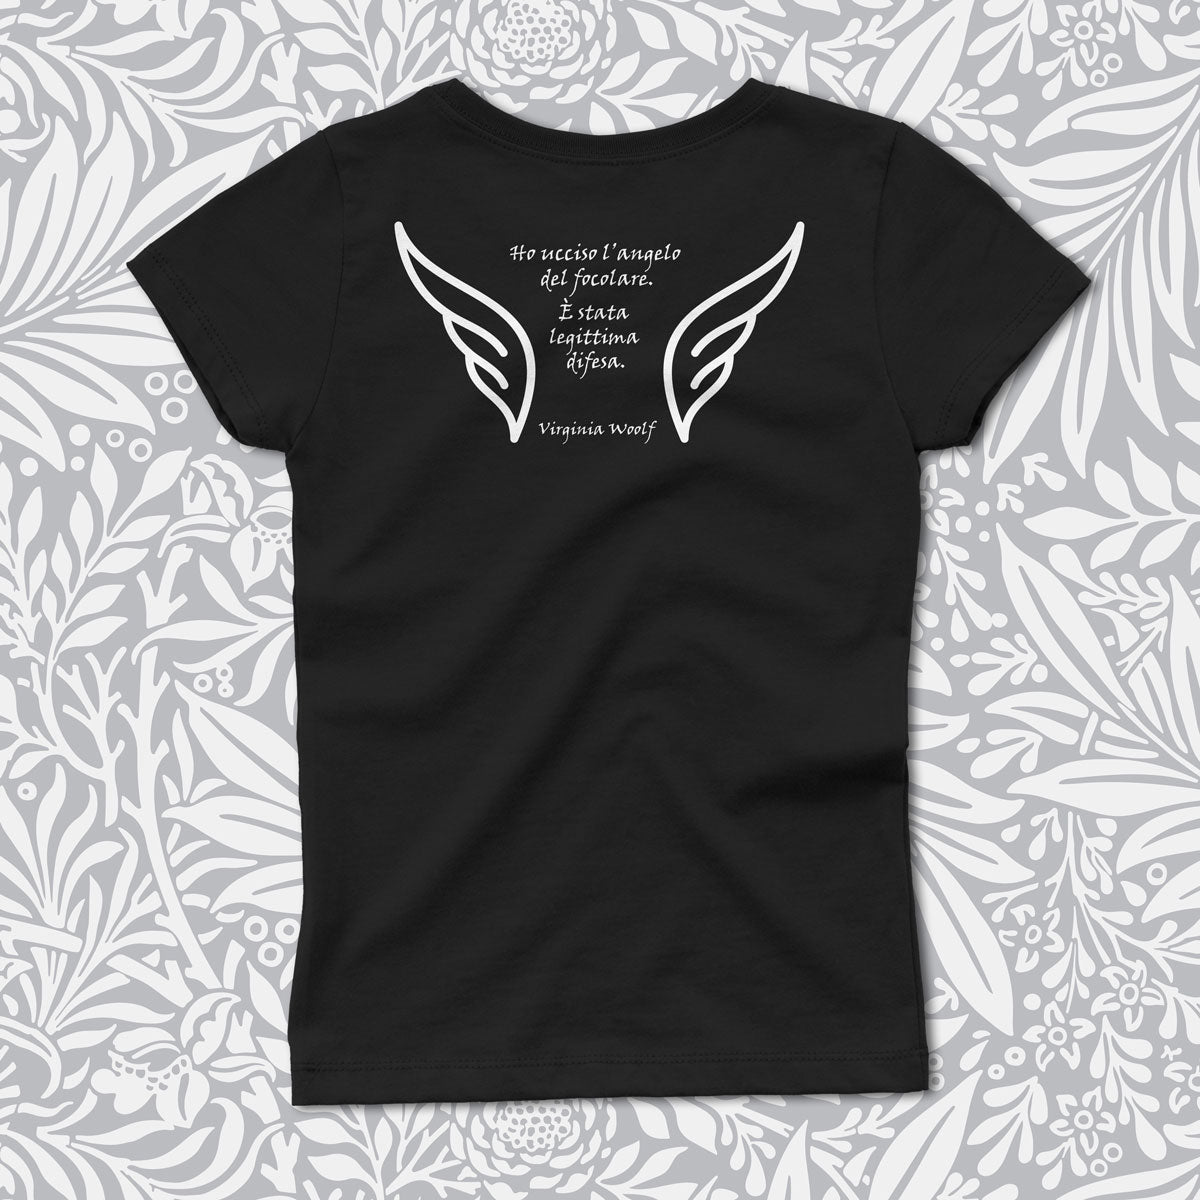 Ho ucciso l’angelo del focolare - Woolf - T-Shirt nera Donna